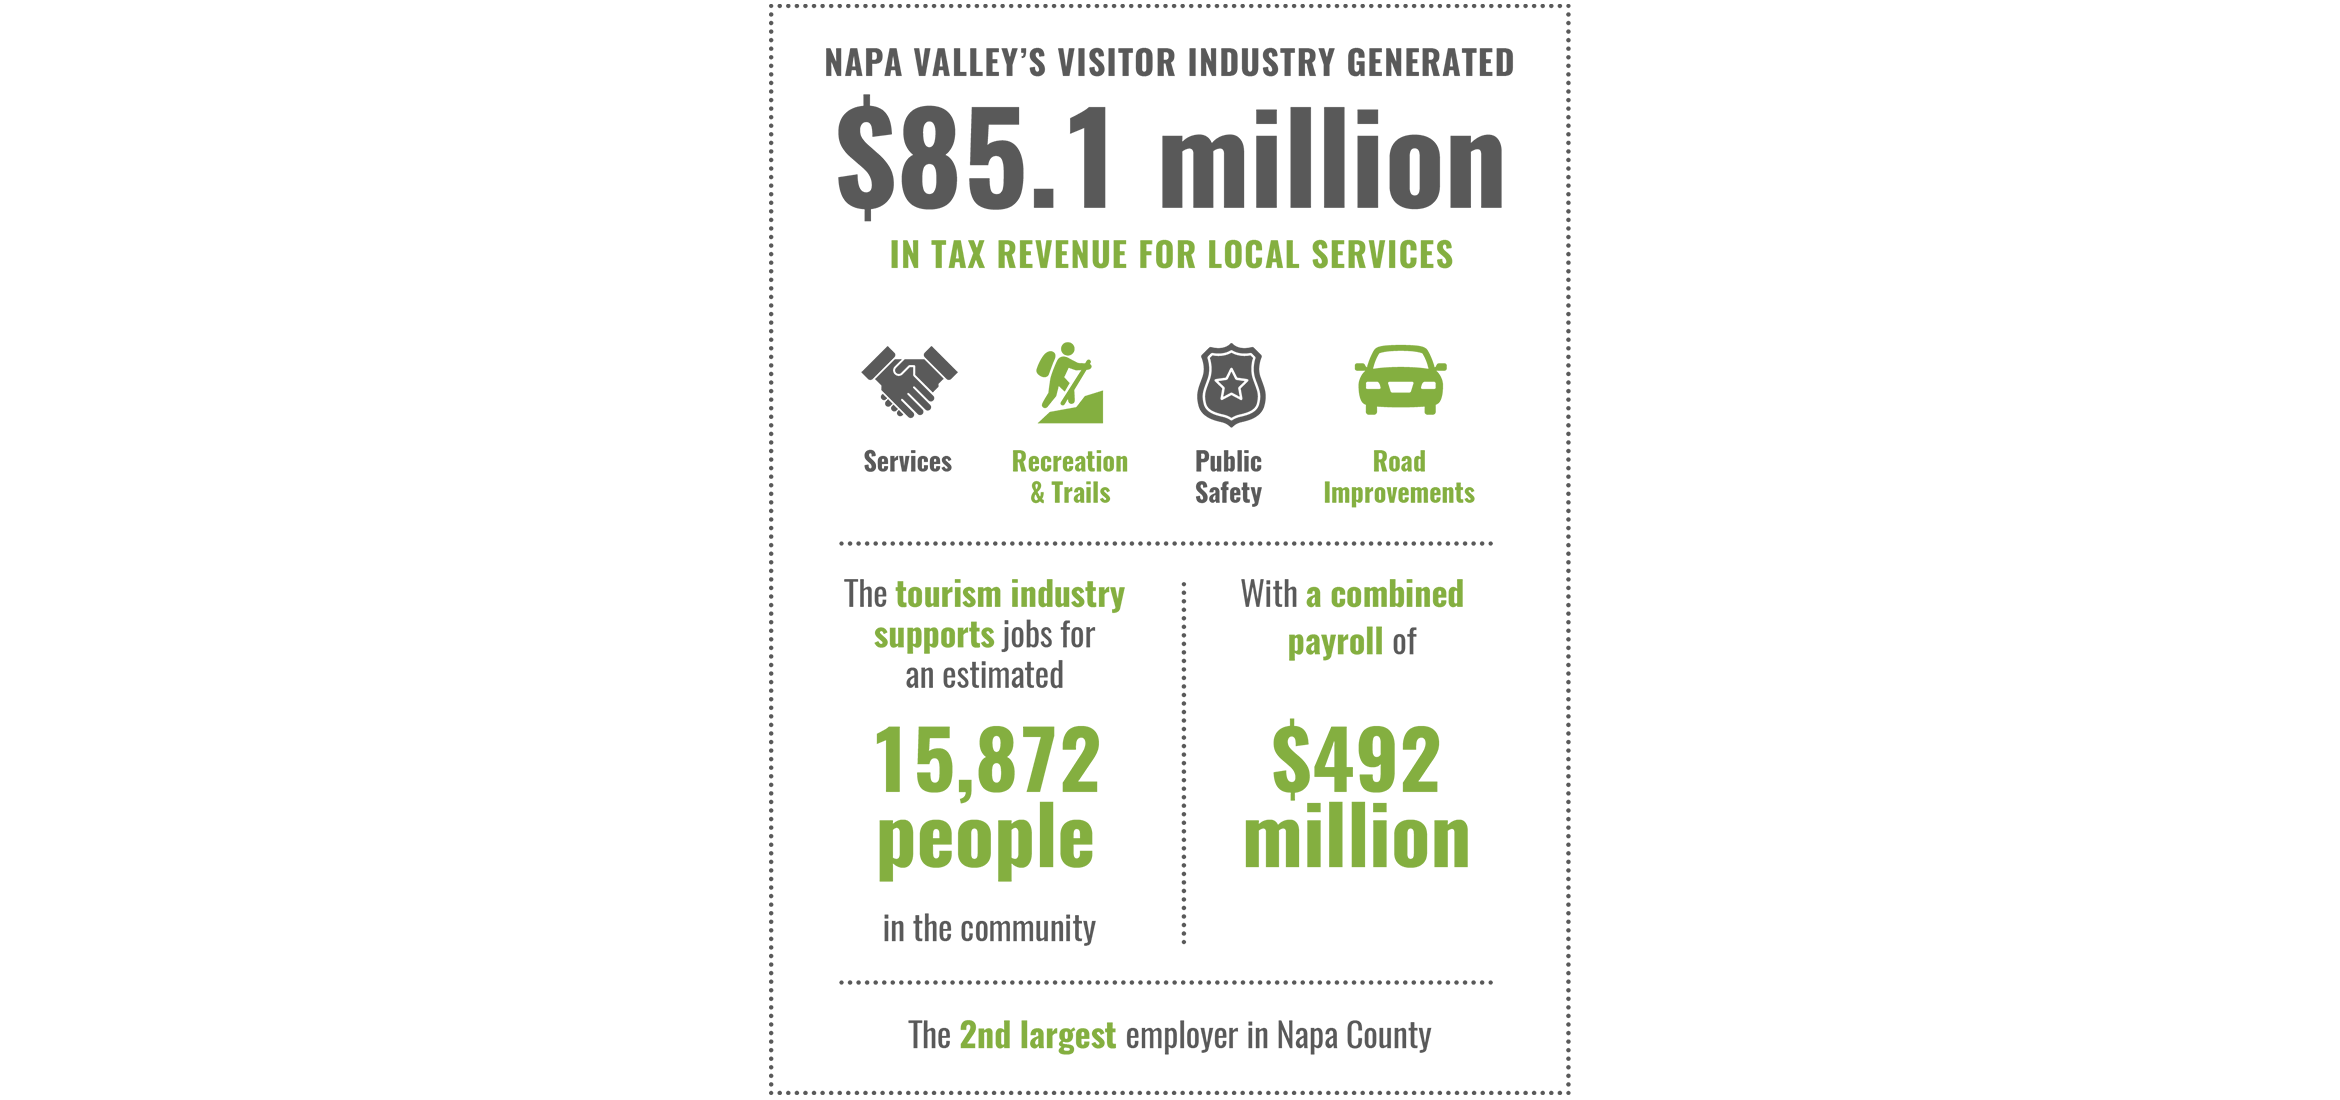 NV Tax Collections & Spending infographic